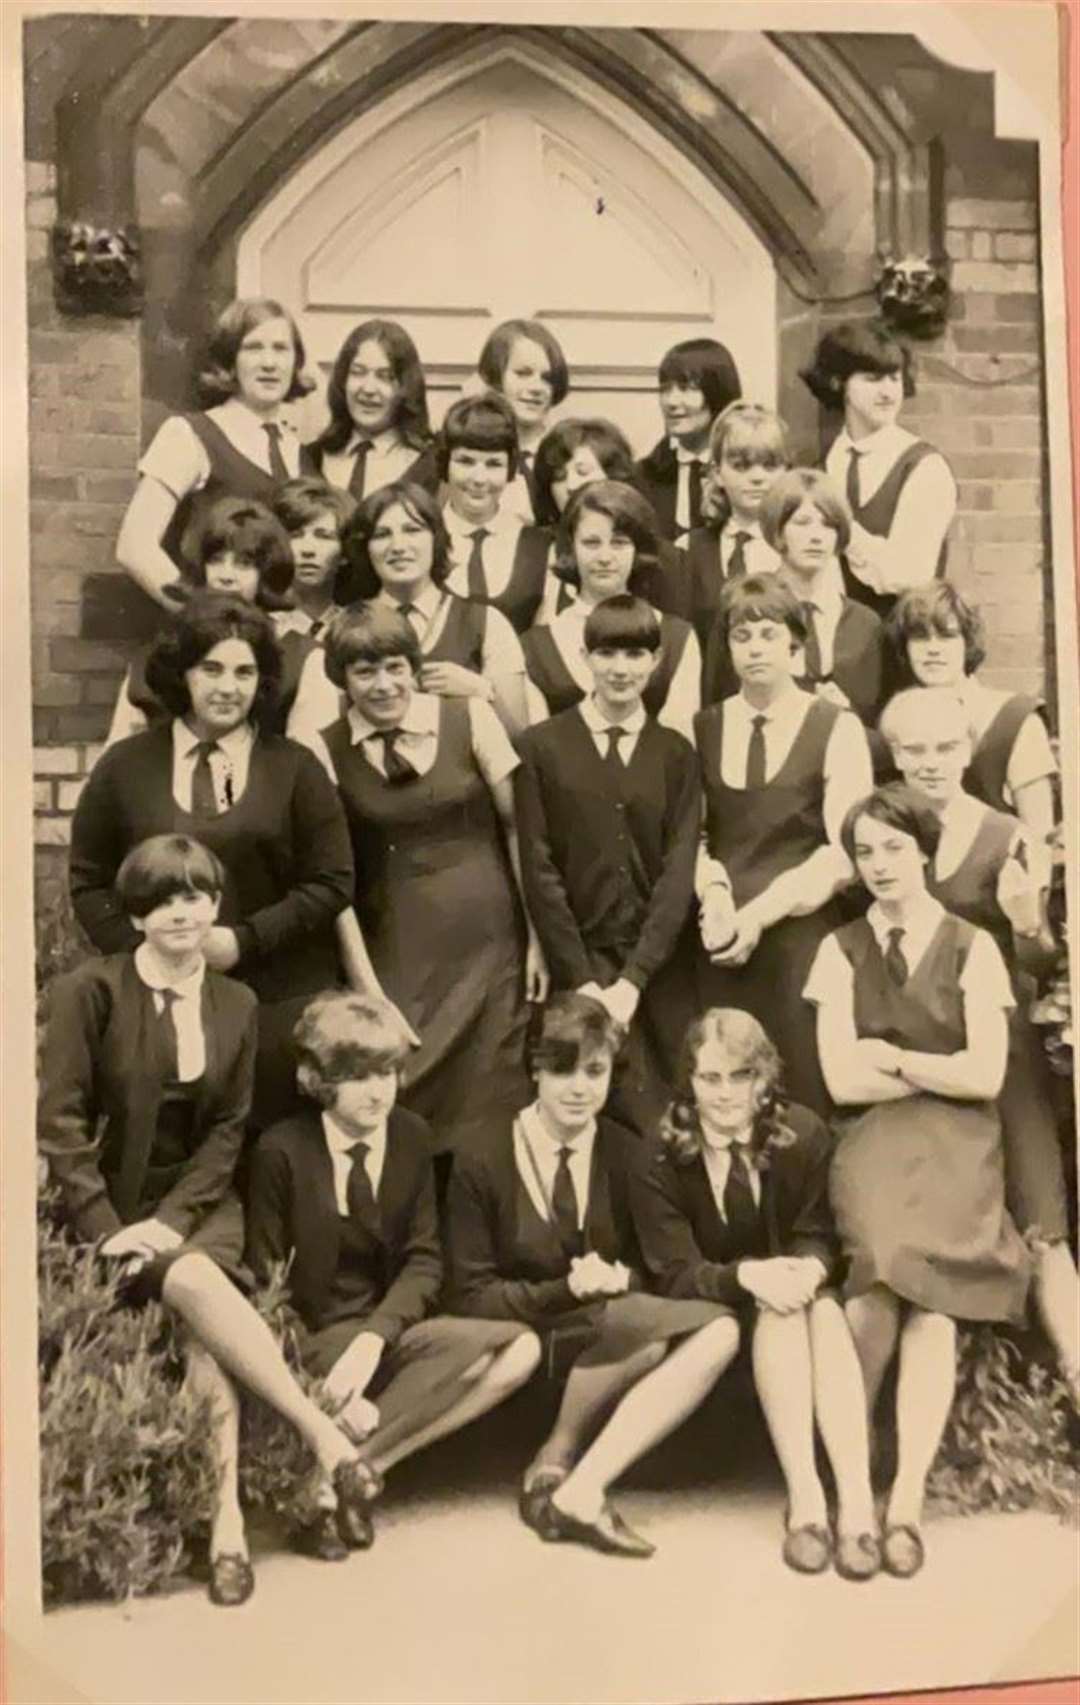 Maidstone Technical School for Girls in 1962